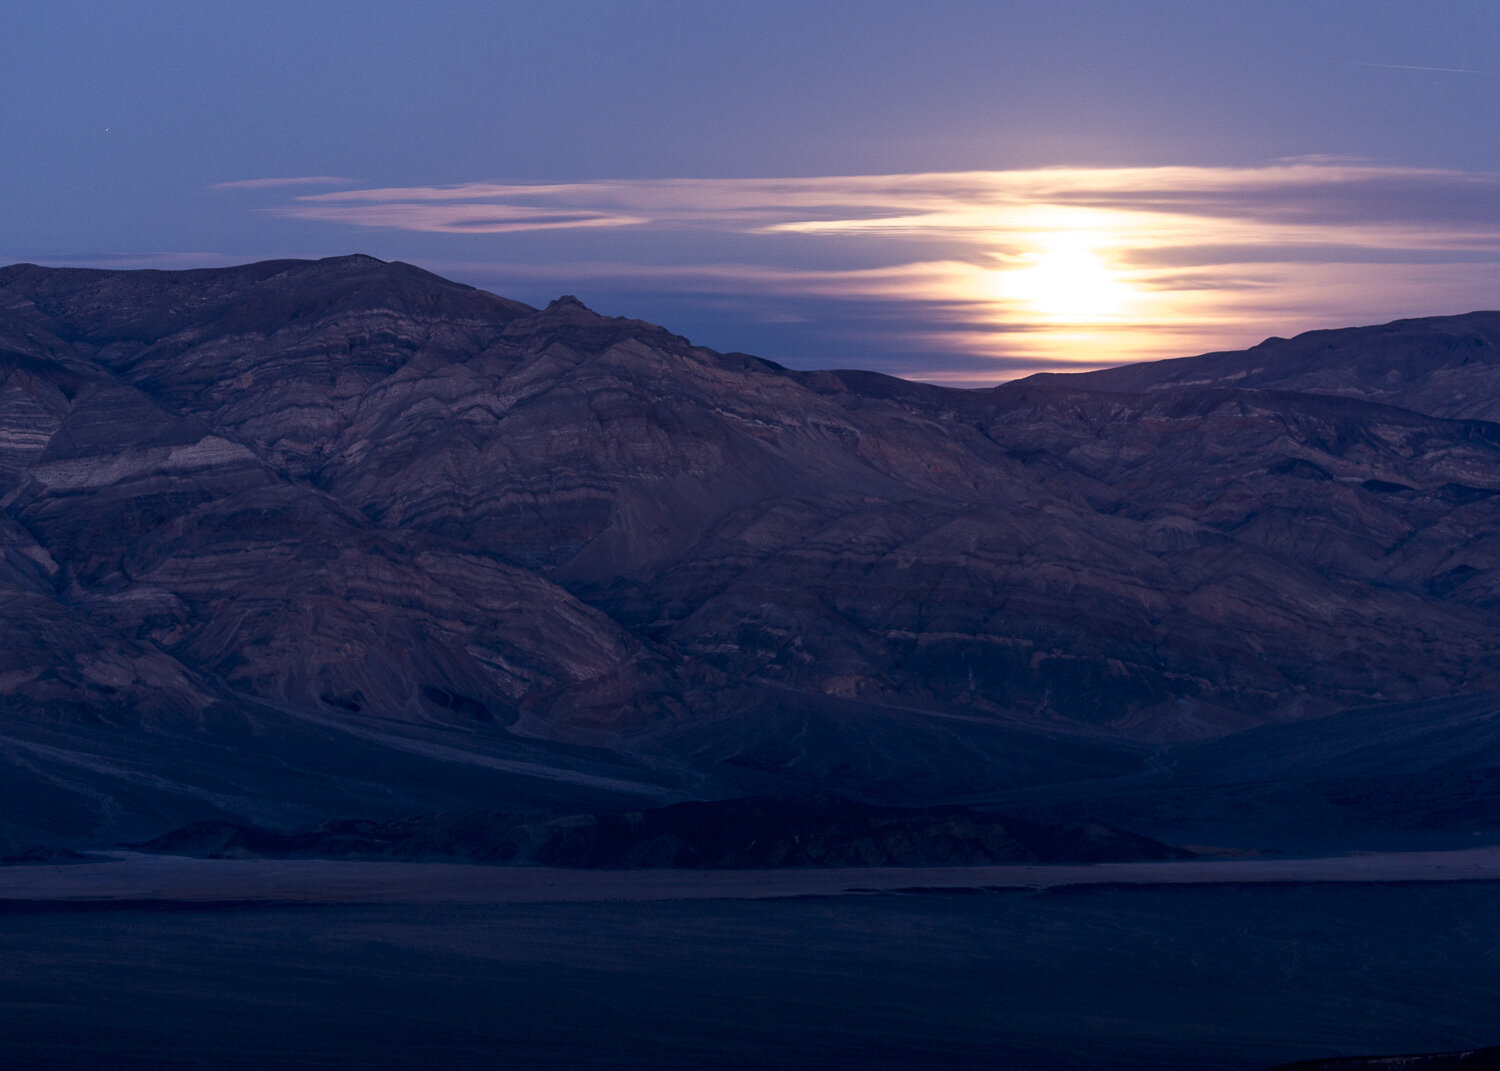 moon_over_mountains_death_valley.jpg